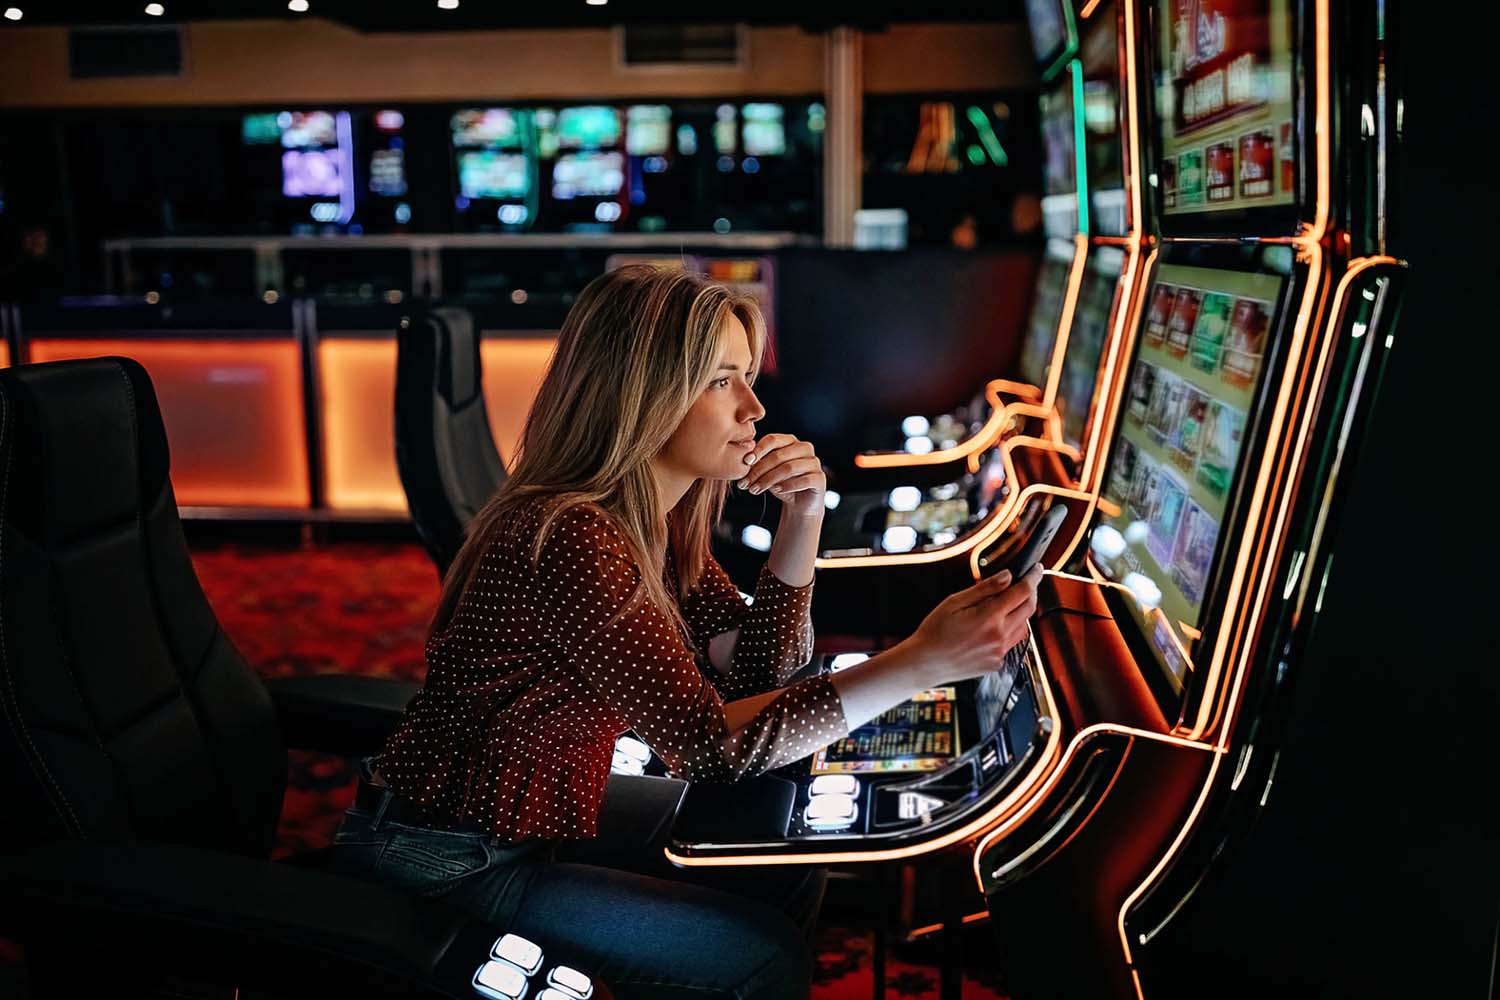 12 Ways You Can casino Without Investing Too Much Of Your Time